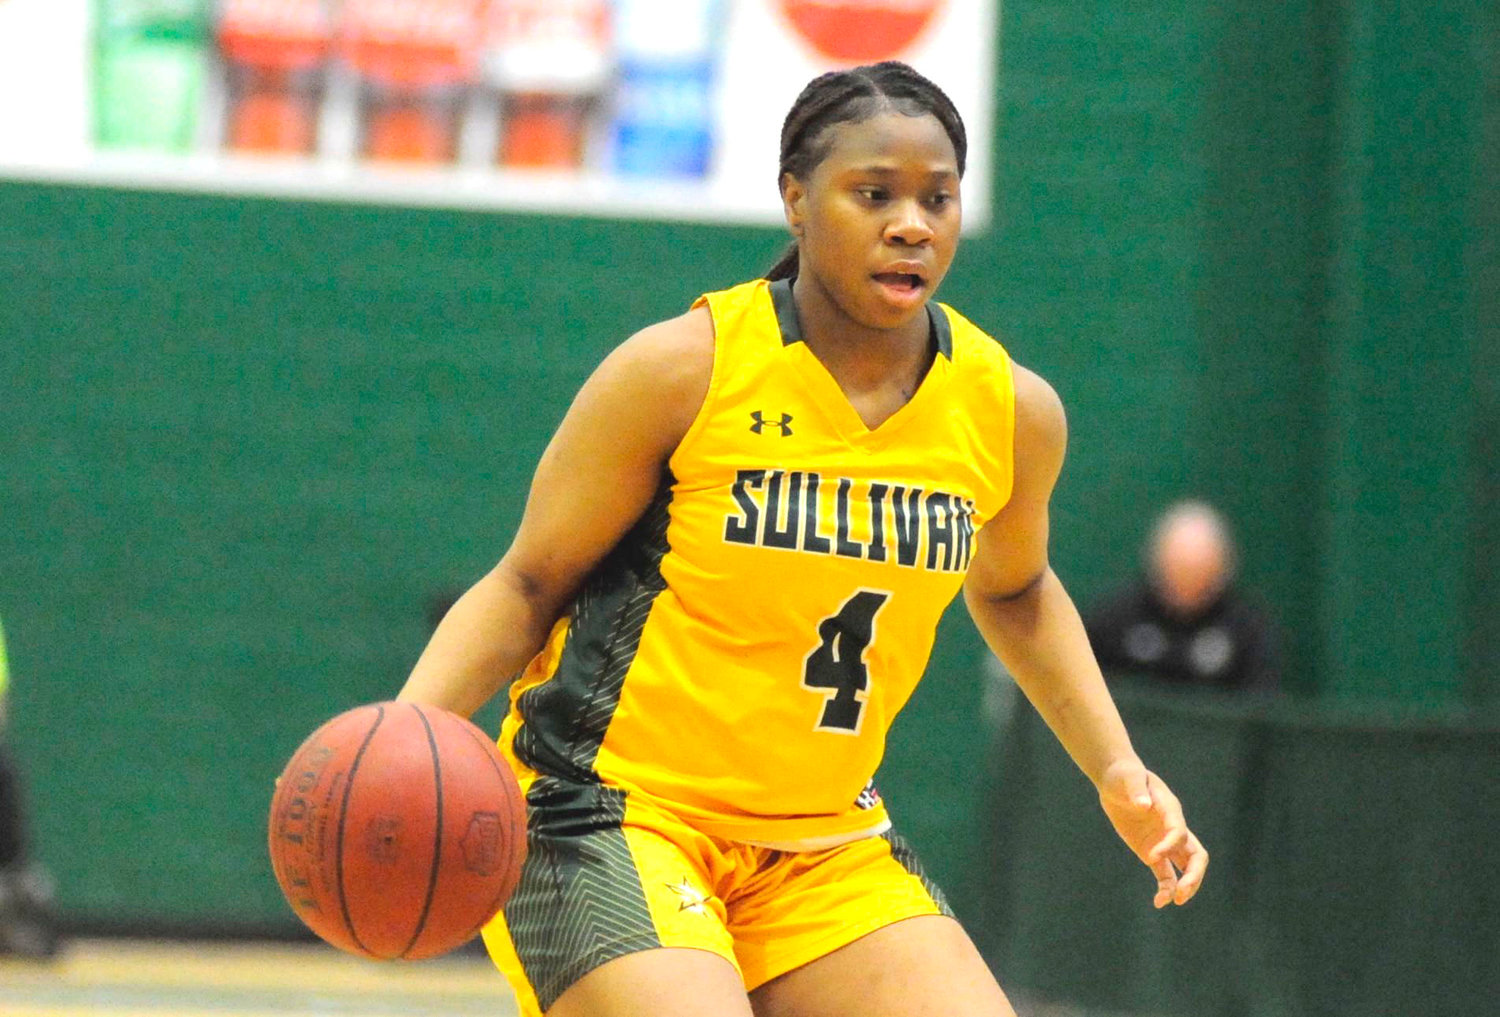 SUNY Sullivan’s Infinity Hammonds posted a three-pointer. The sophomore guard hails from Murry Bergtraum High School in Mount Vernon, NY.